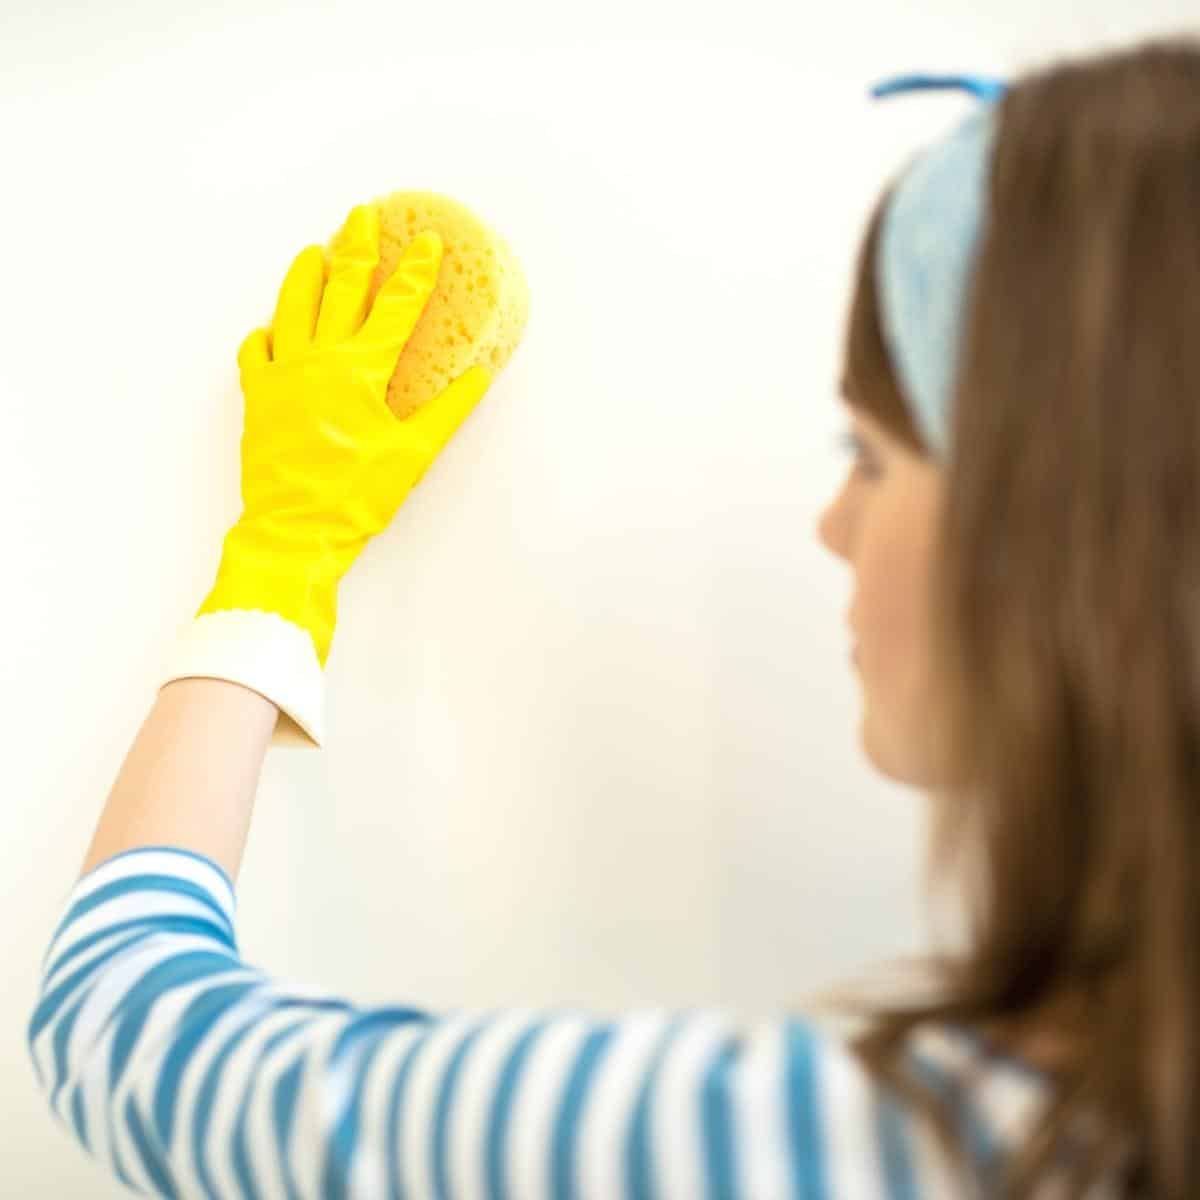 wiping down walls with a sponge and water after removing wallpaper